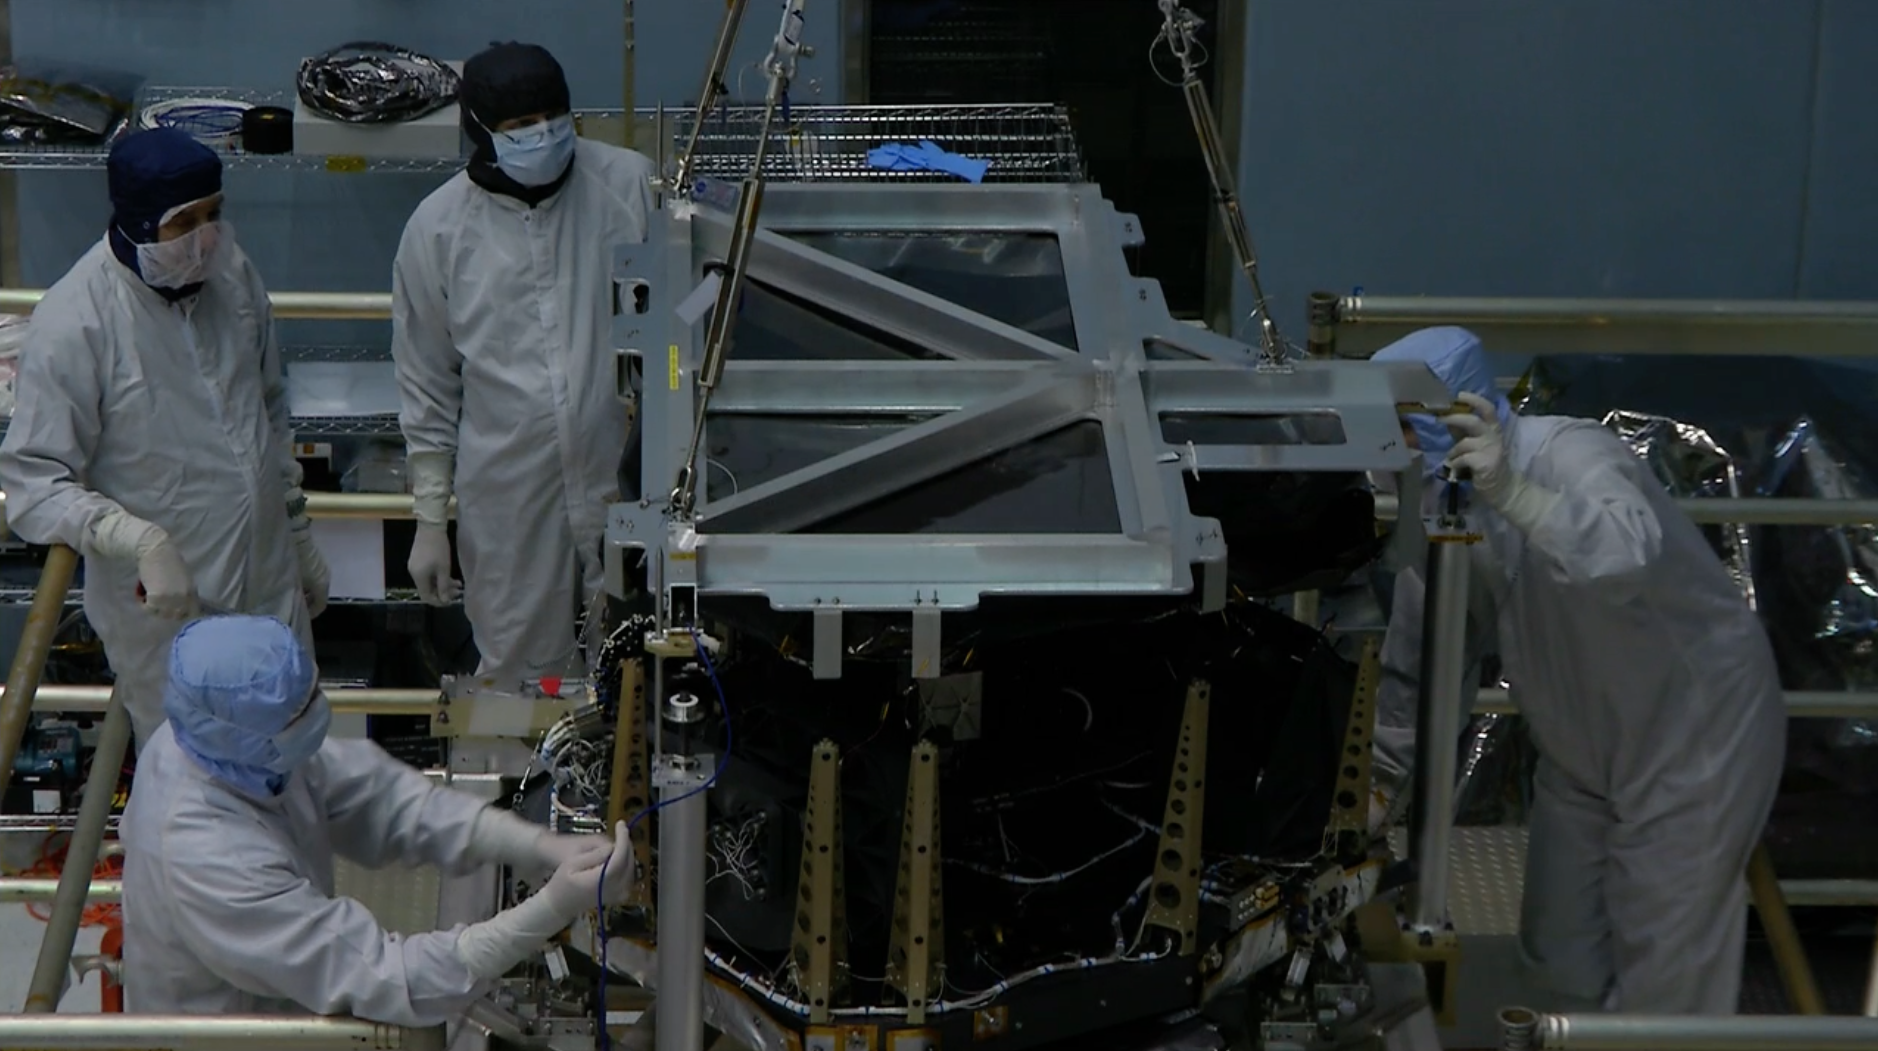 B-roll video of Airbus engineers removing the cover from the Near InfraRed Spectrometer (NIRSpec) instrument